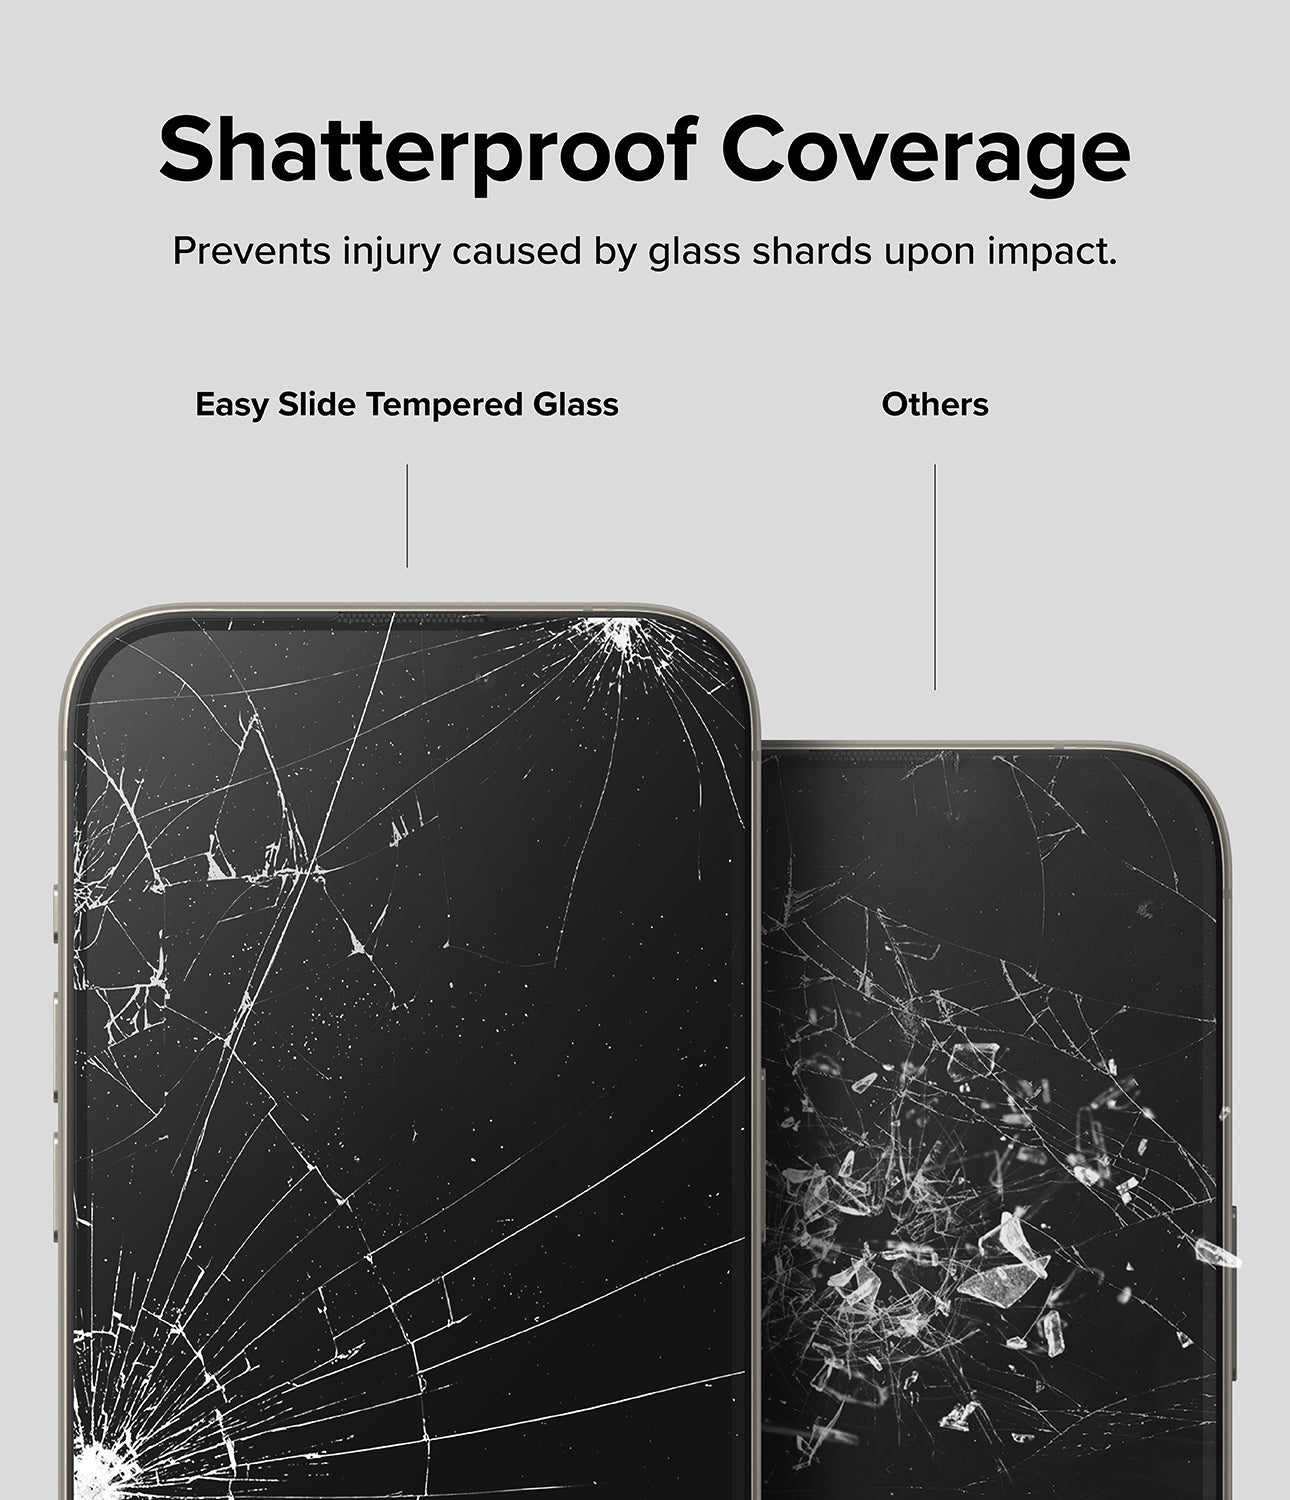 iPhone 15 Pro Max Screen Protector | Easy Slide Tempered Glass - Shatterproof Coverage. Prevents injury by glass shards upon impact.